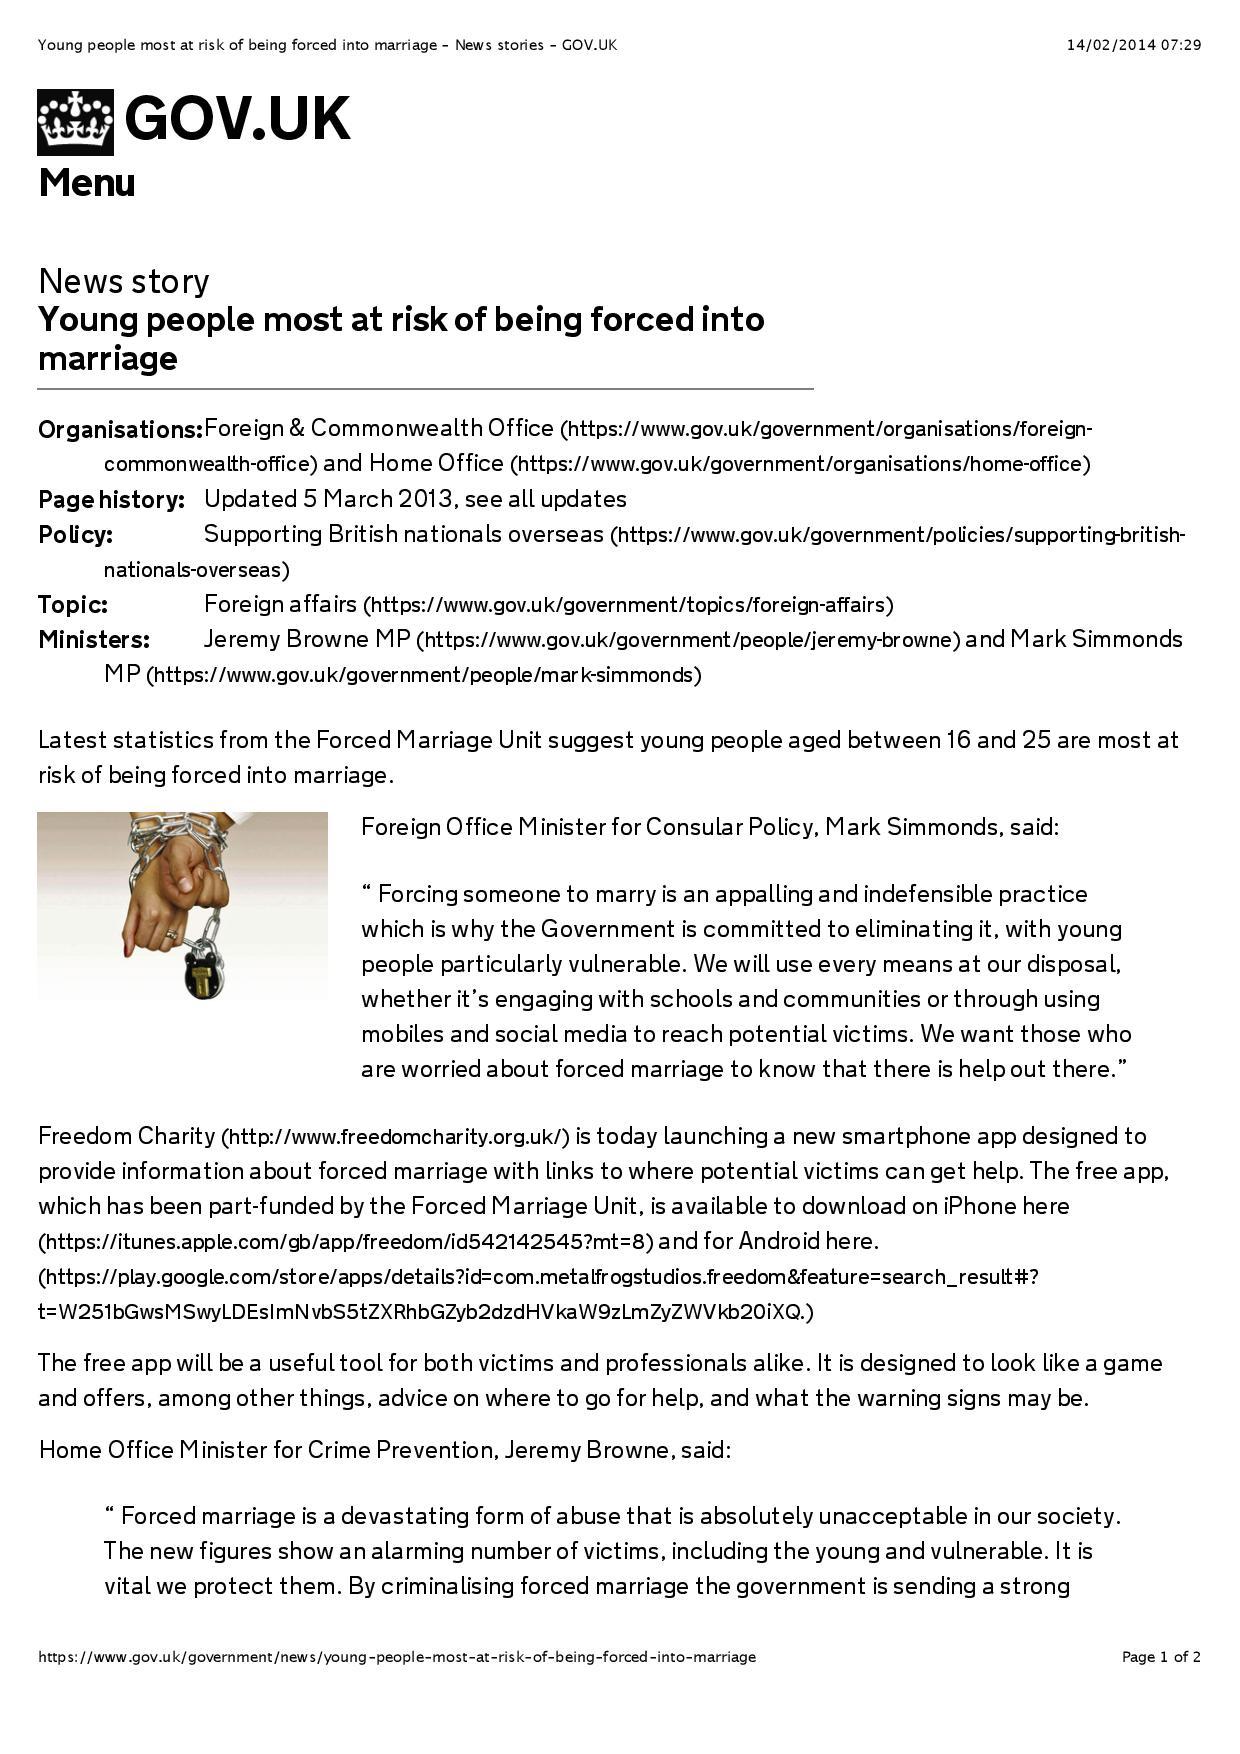 done-gov-uk-young-people-most-at-risk-of-being-forced-into-marriage-news-stories-gov-uk-page-001